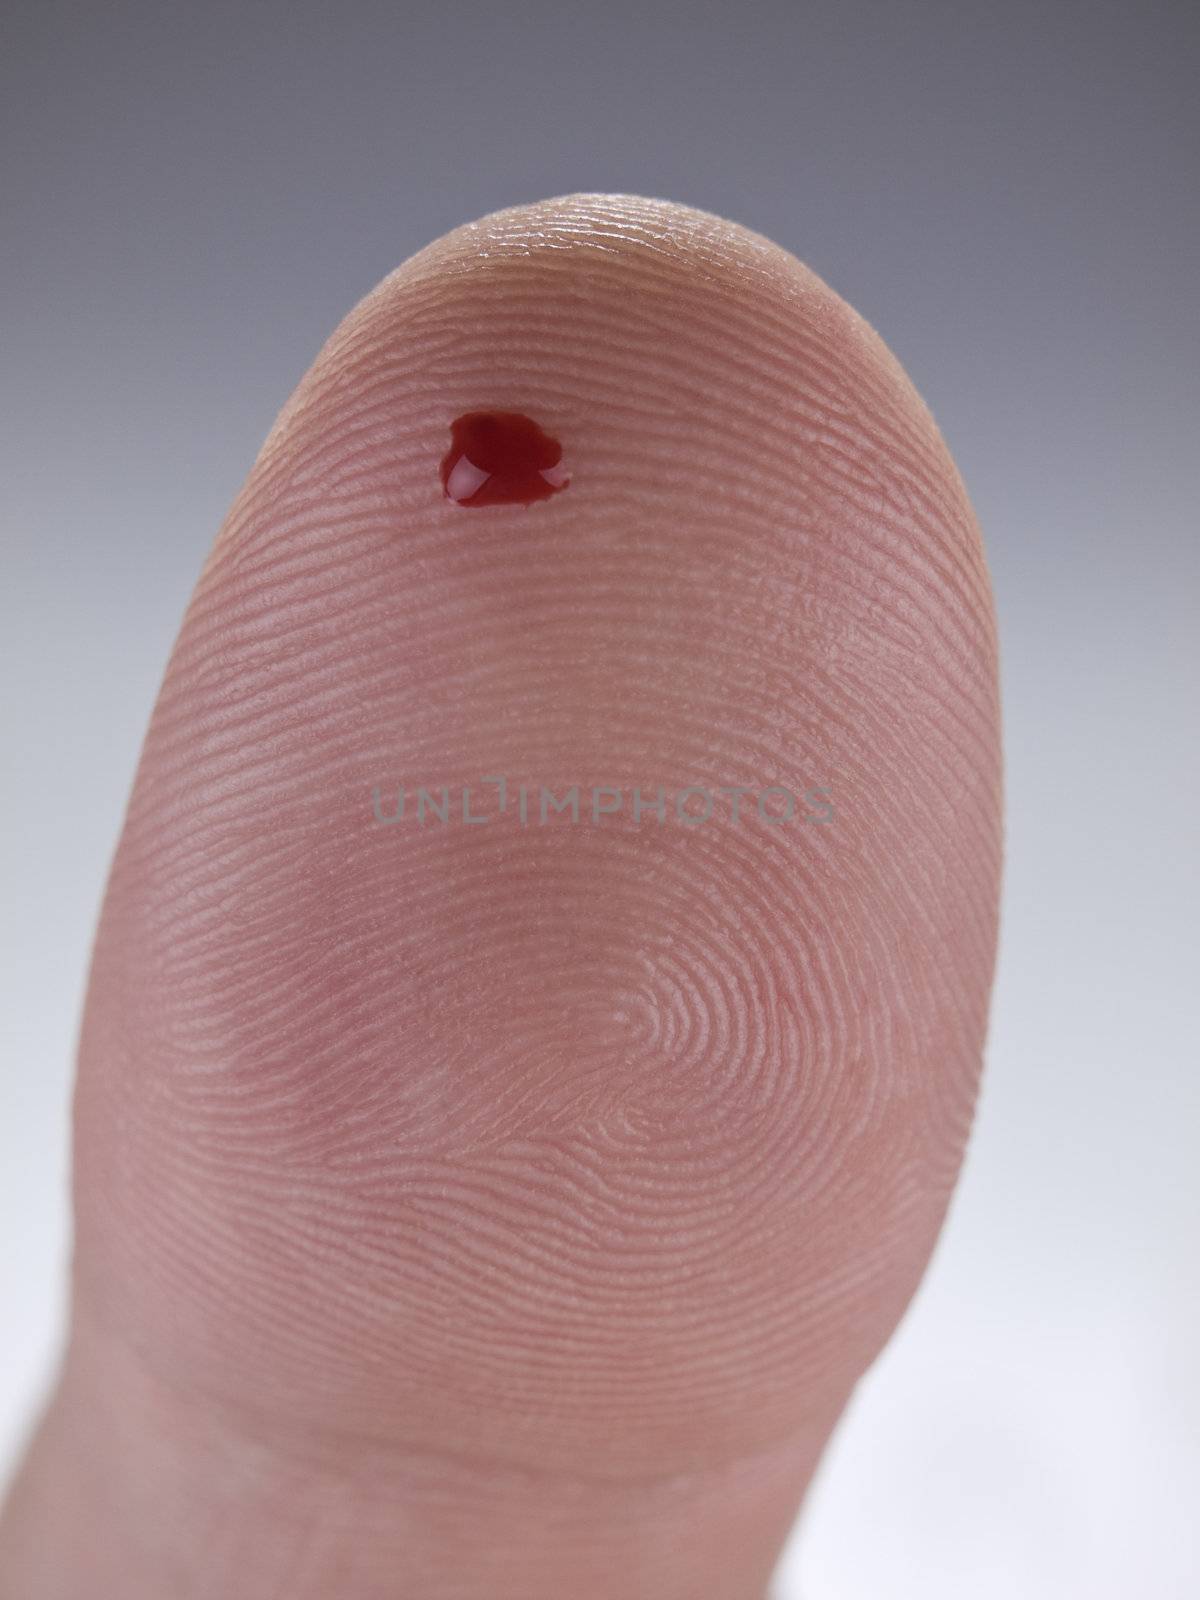 Macro view of a drop of real blood on a human thumb.